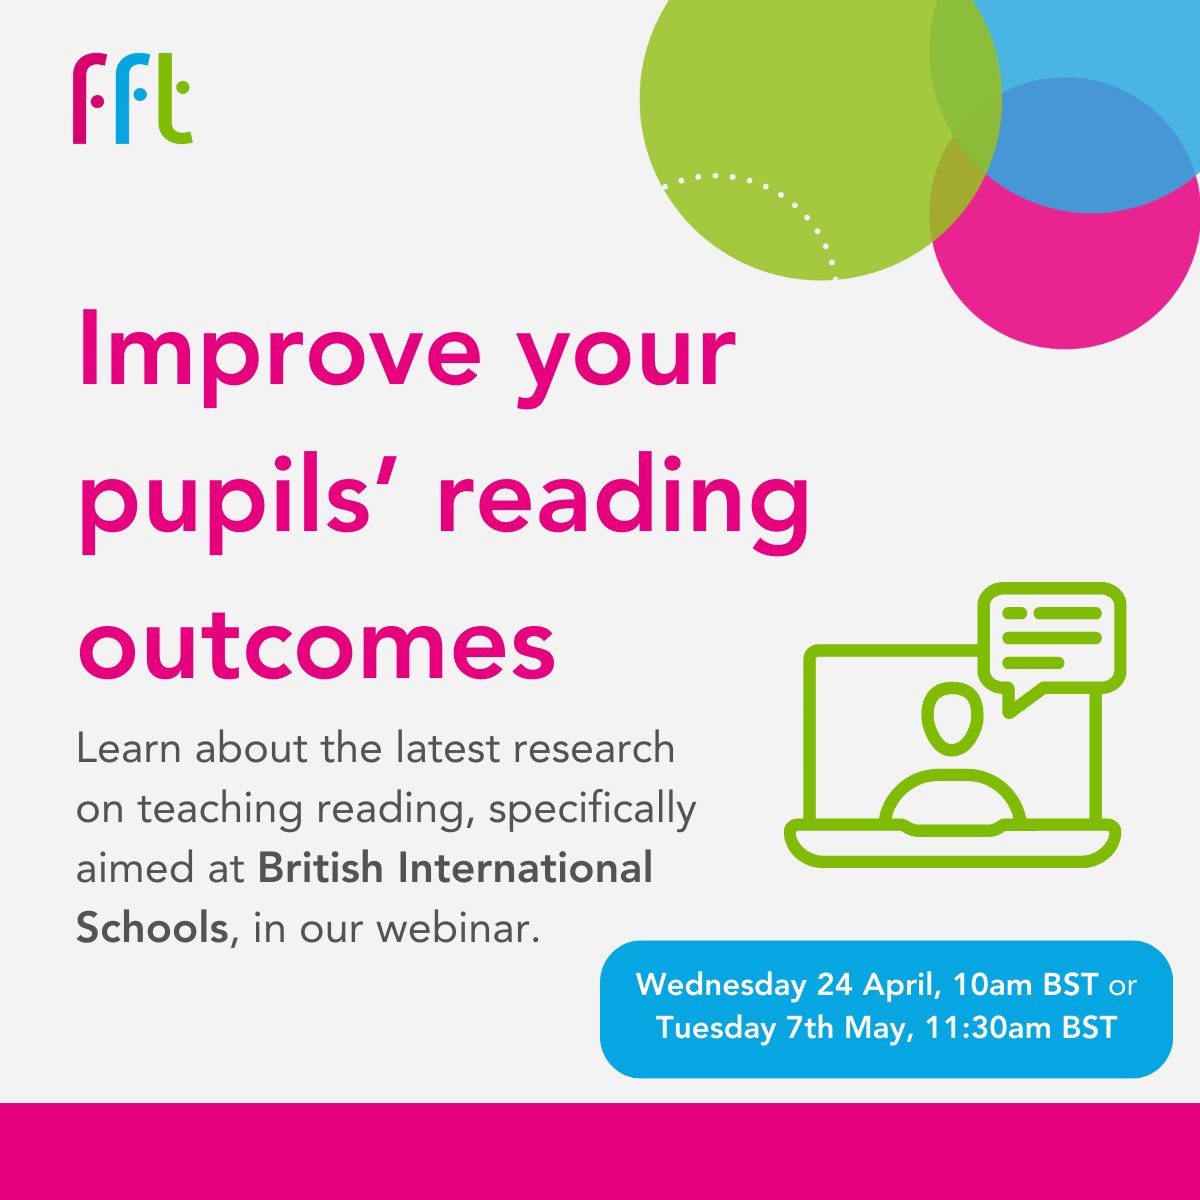 It’s time to take charge of your school’s reading outcomes. If you're a British International School, join our free webinar led by #literacy experts, and learn how you can help your students make 1.83x the expected progress in reading: bit.ly/3U6eb94 #EAL